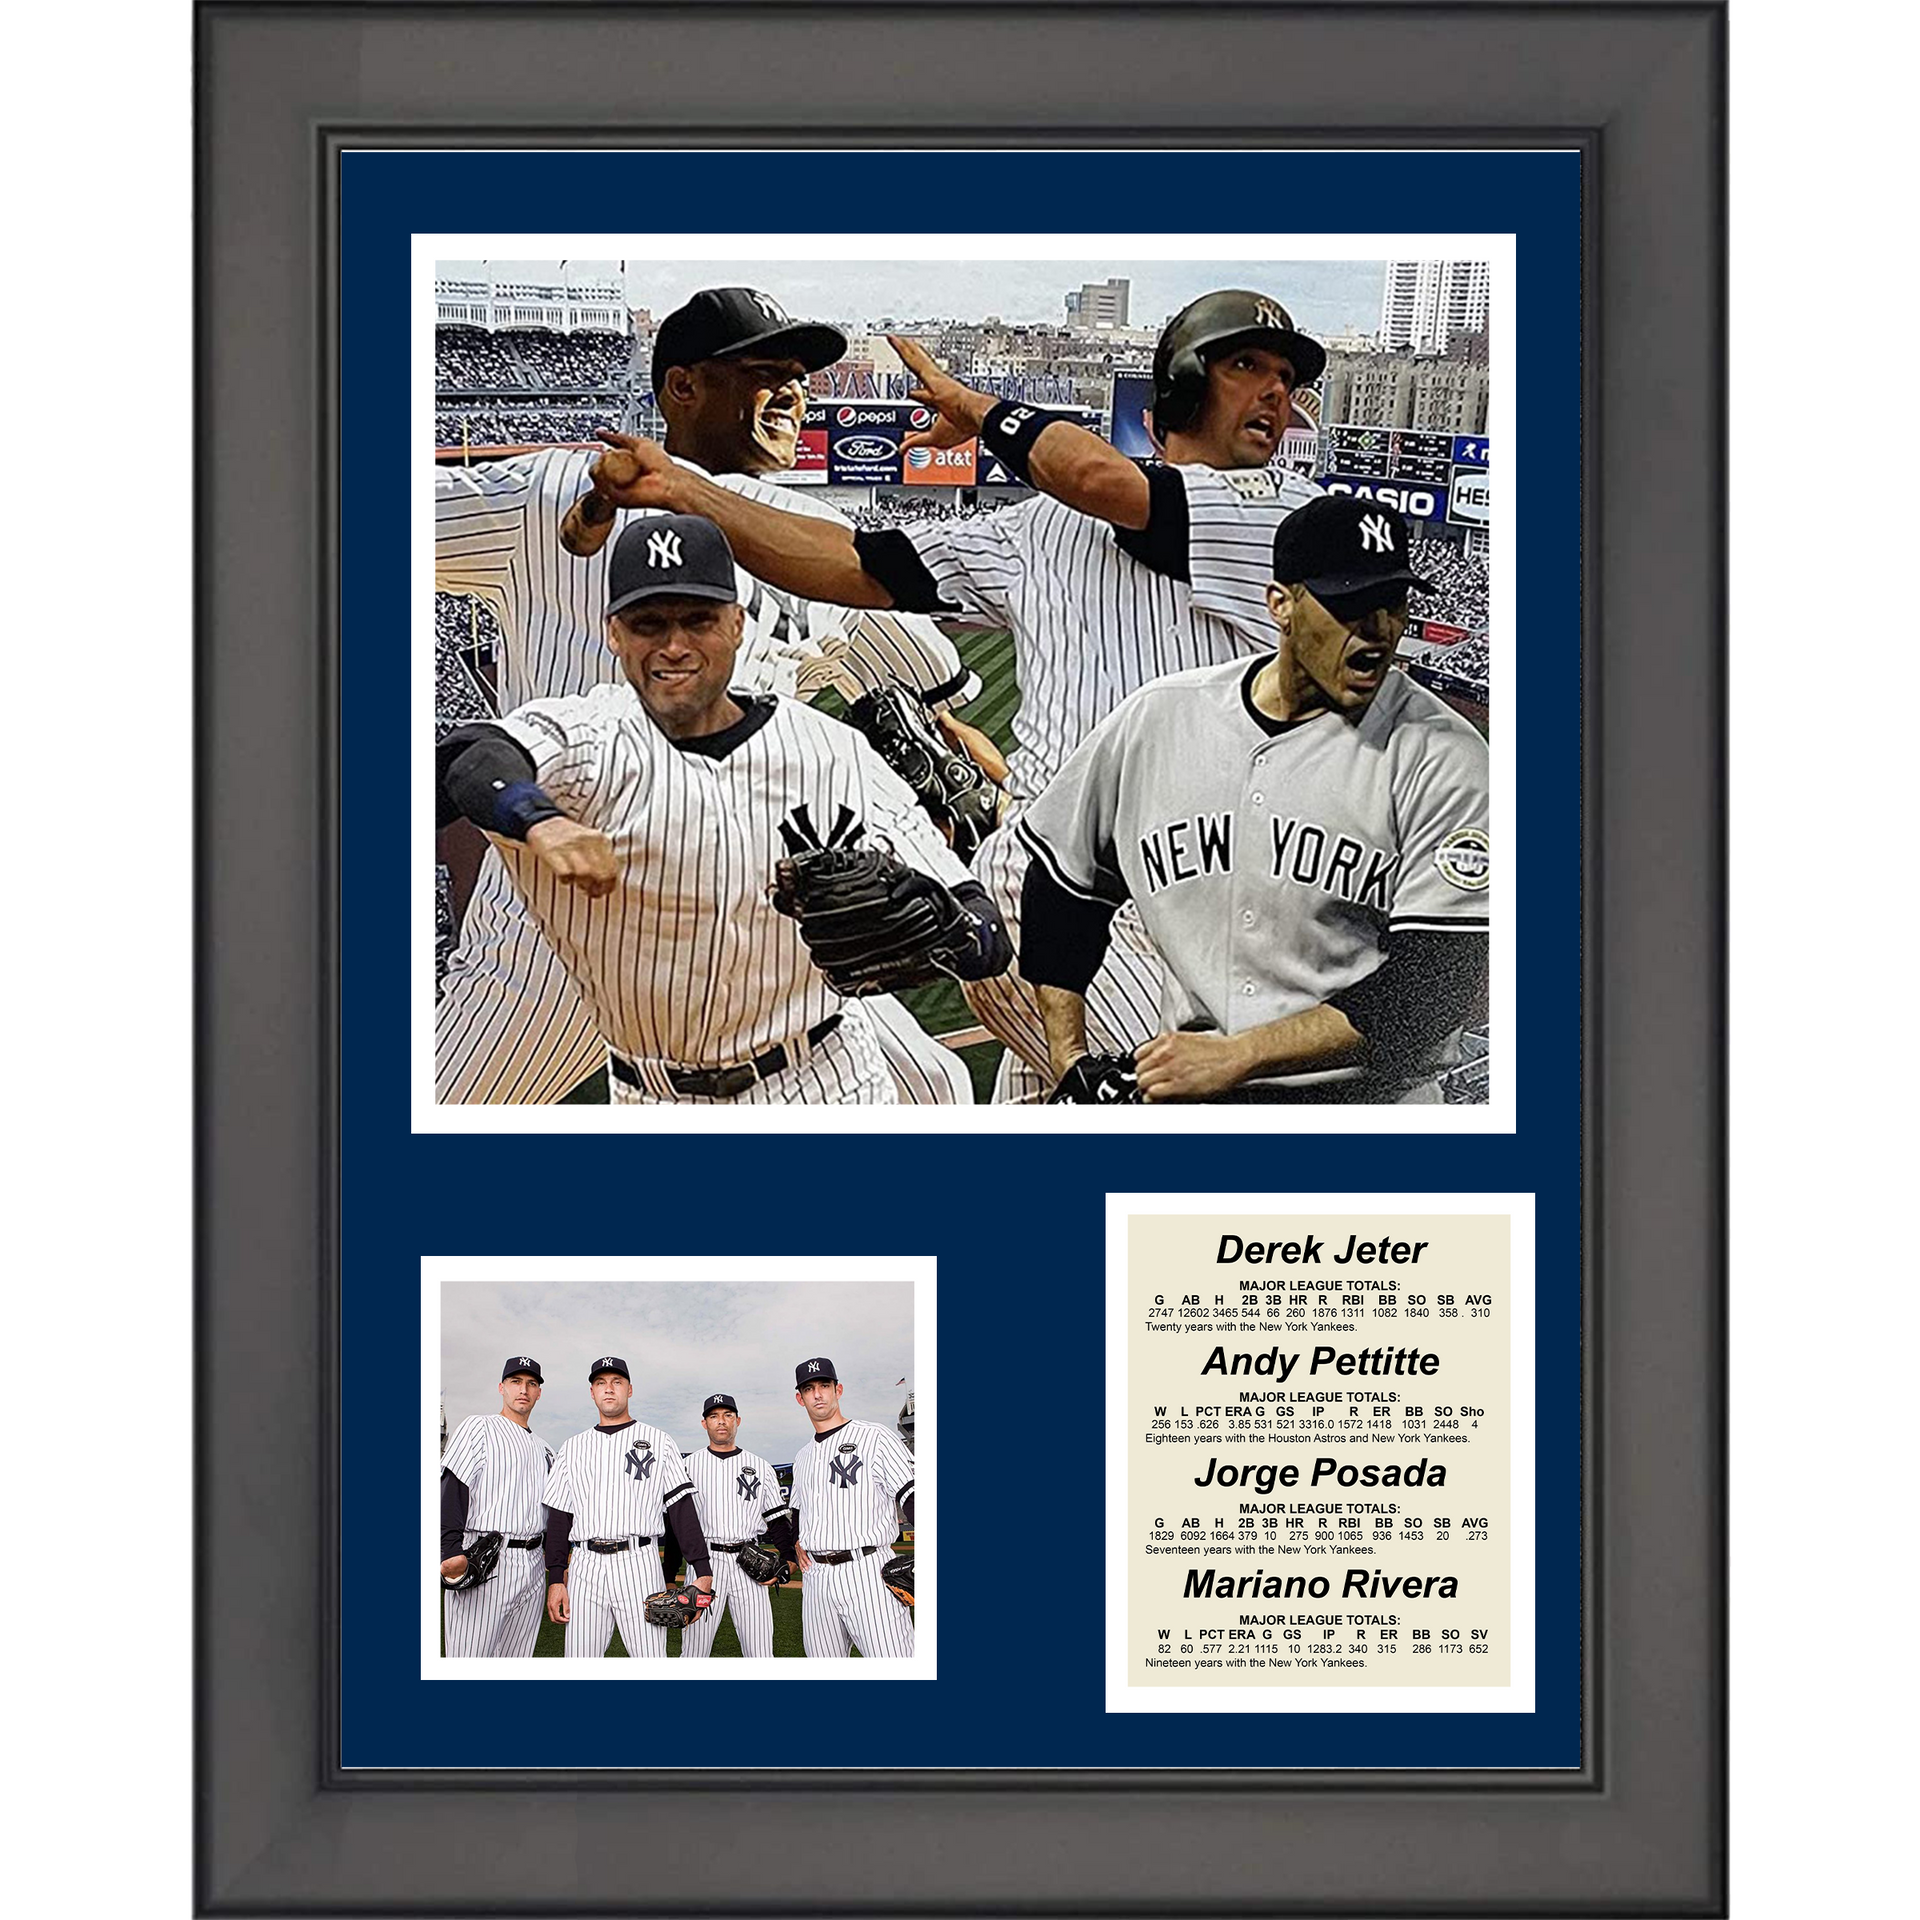 The Yankees Core Four Bundle 3D Card Lot of the Iconic World 